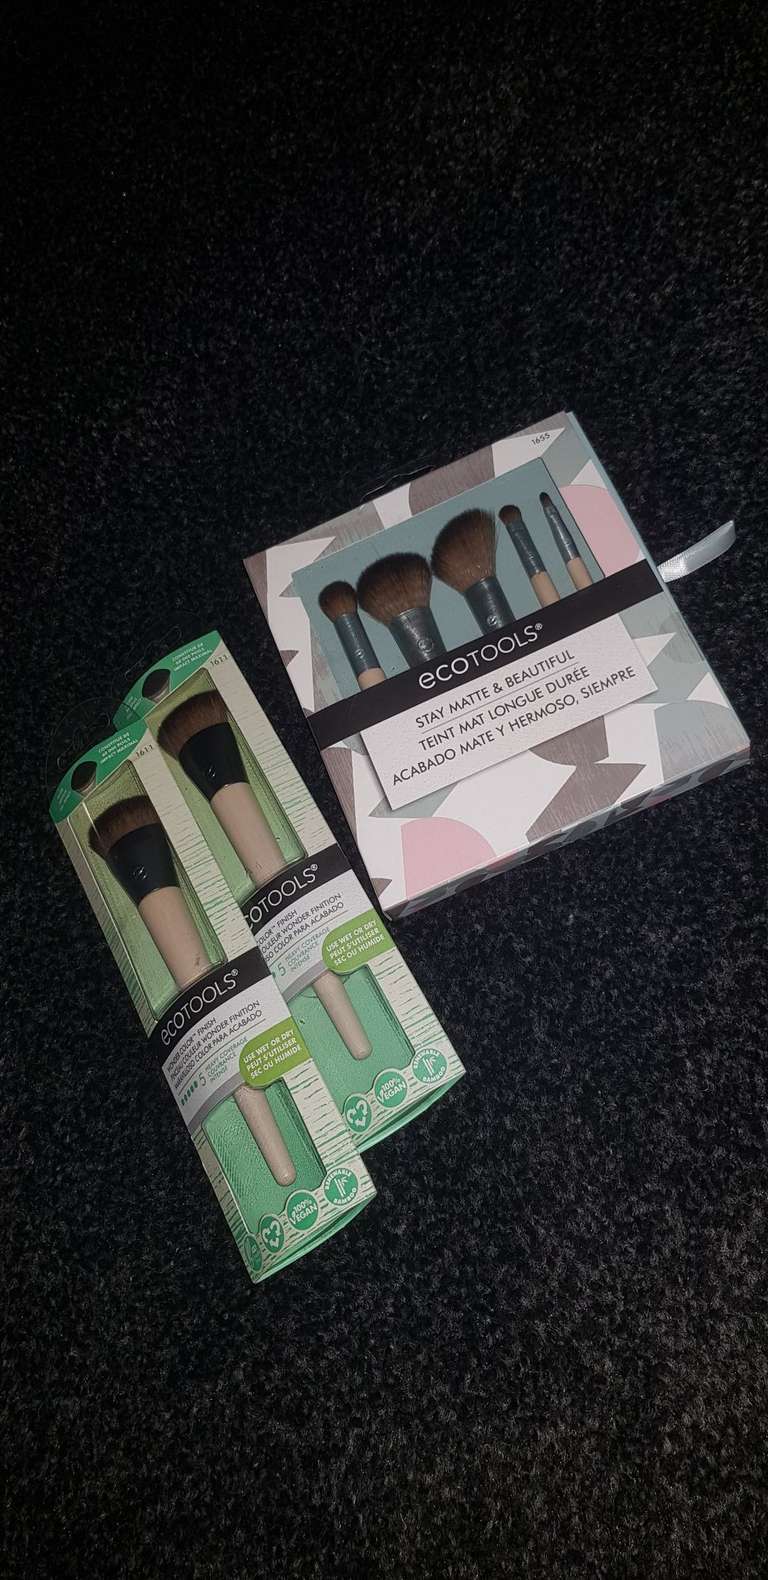 Eco tools makeup brush set instore at Boots for £2.70